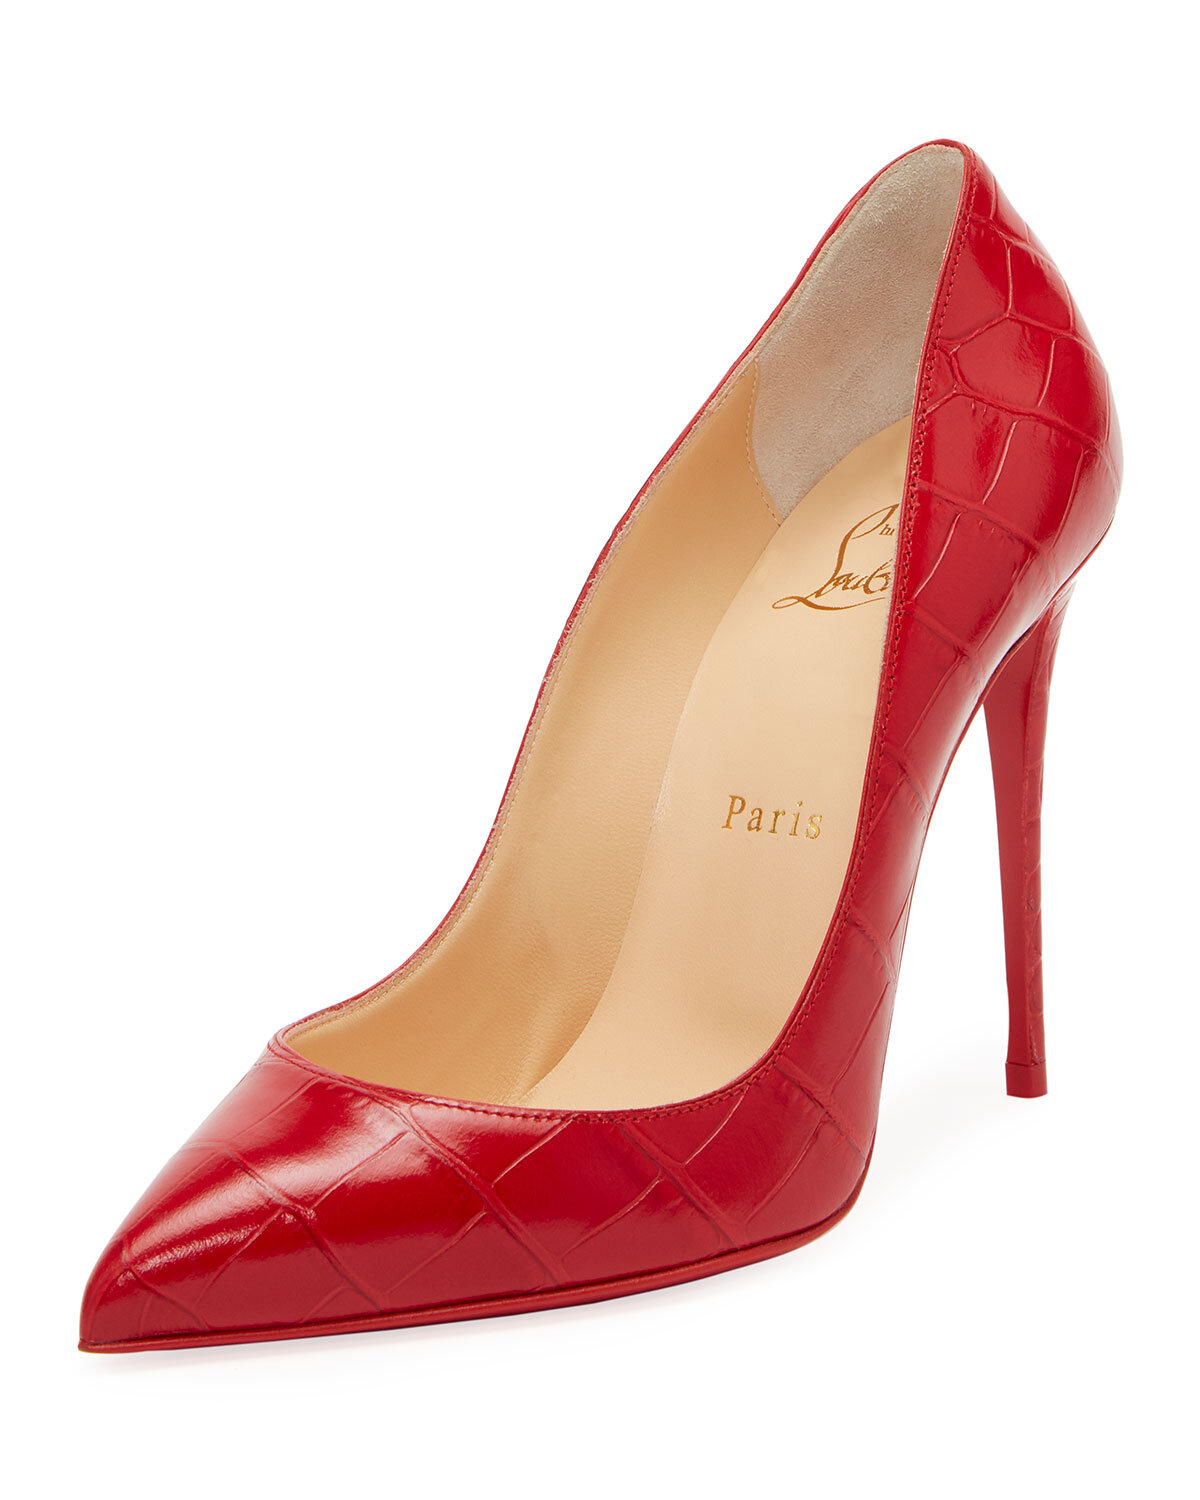 Christian Louboutin Pigalle Follies mock-croc 100mm red sole pumps